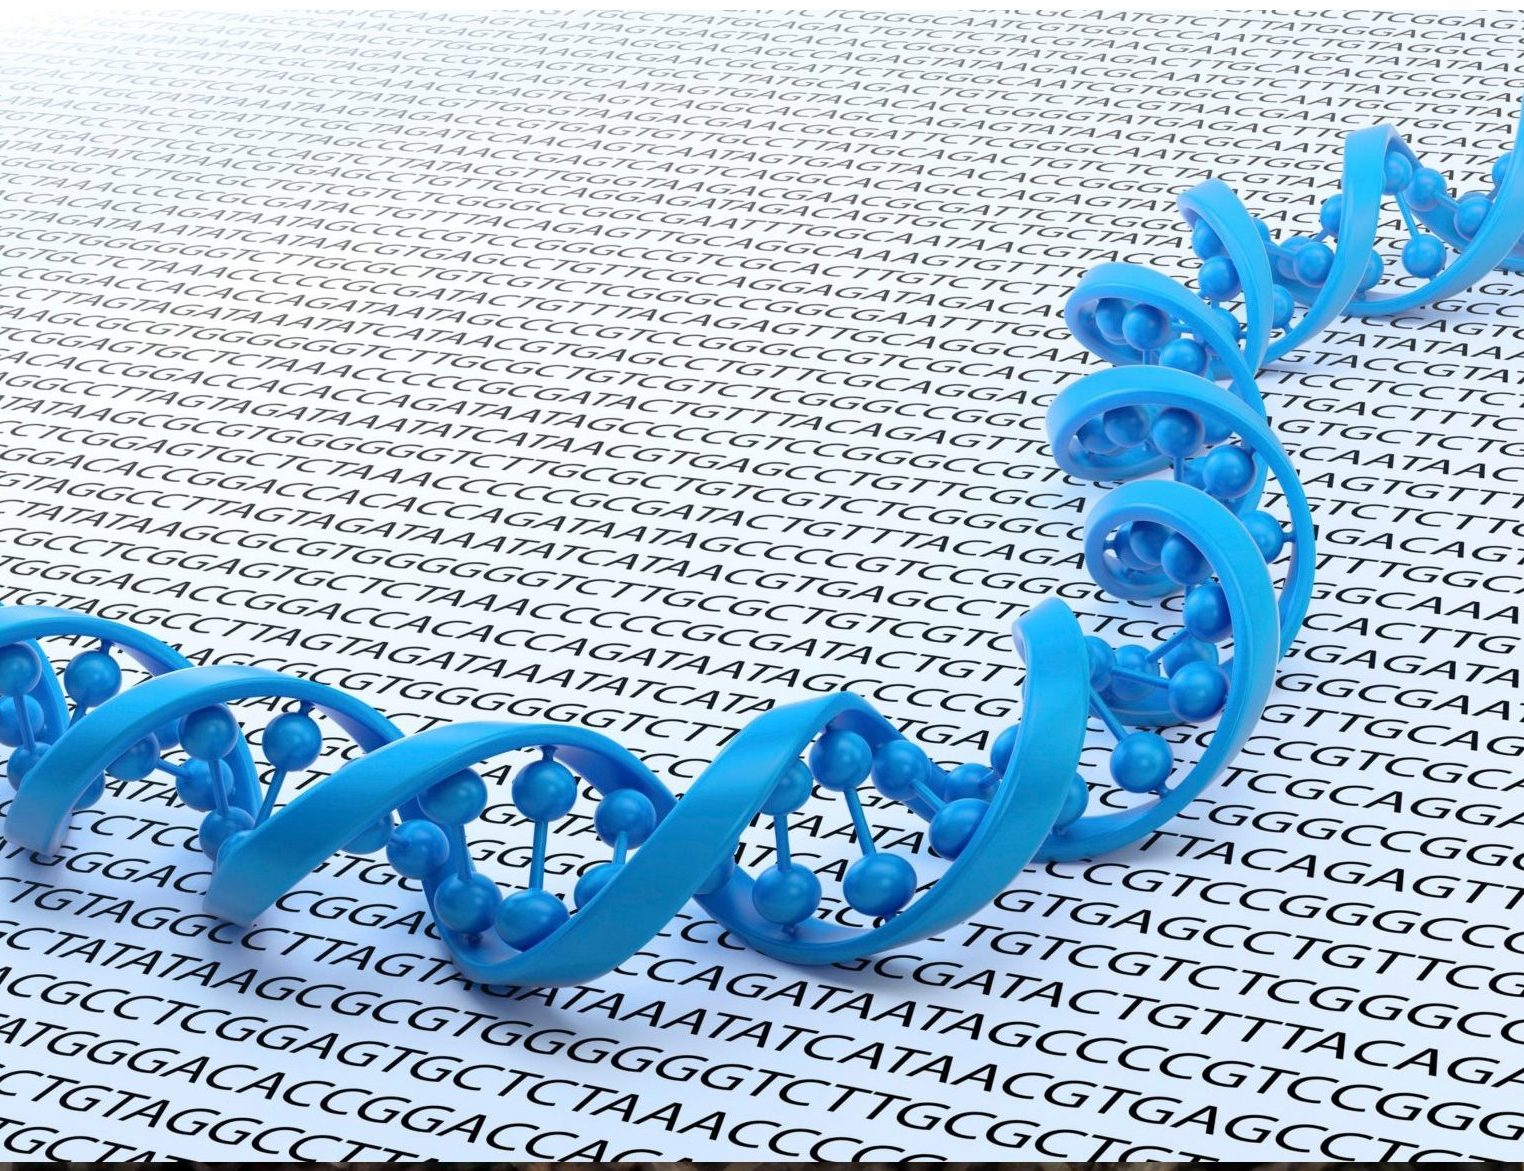 The genome revolution: what does it consist of?